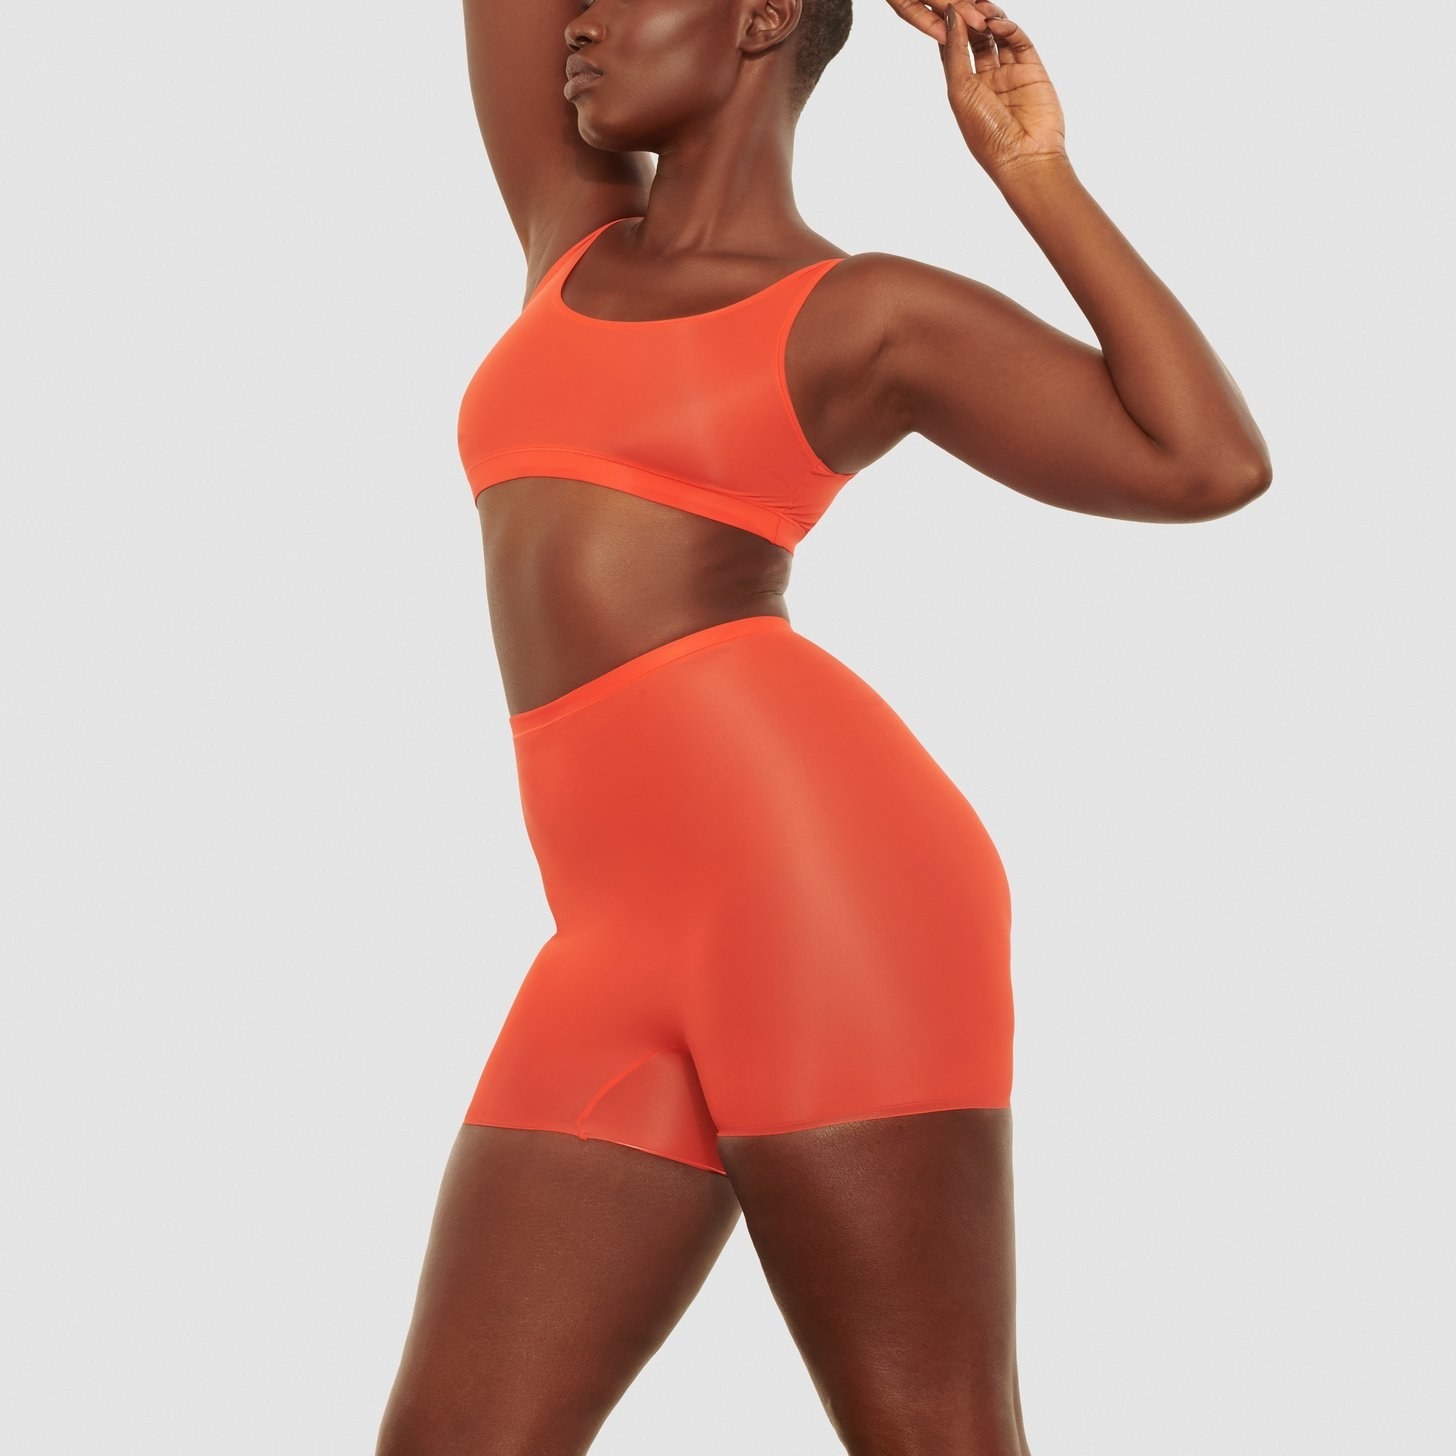 a model in an orange bralette and matching bike shorts